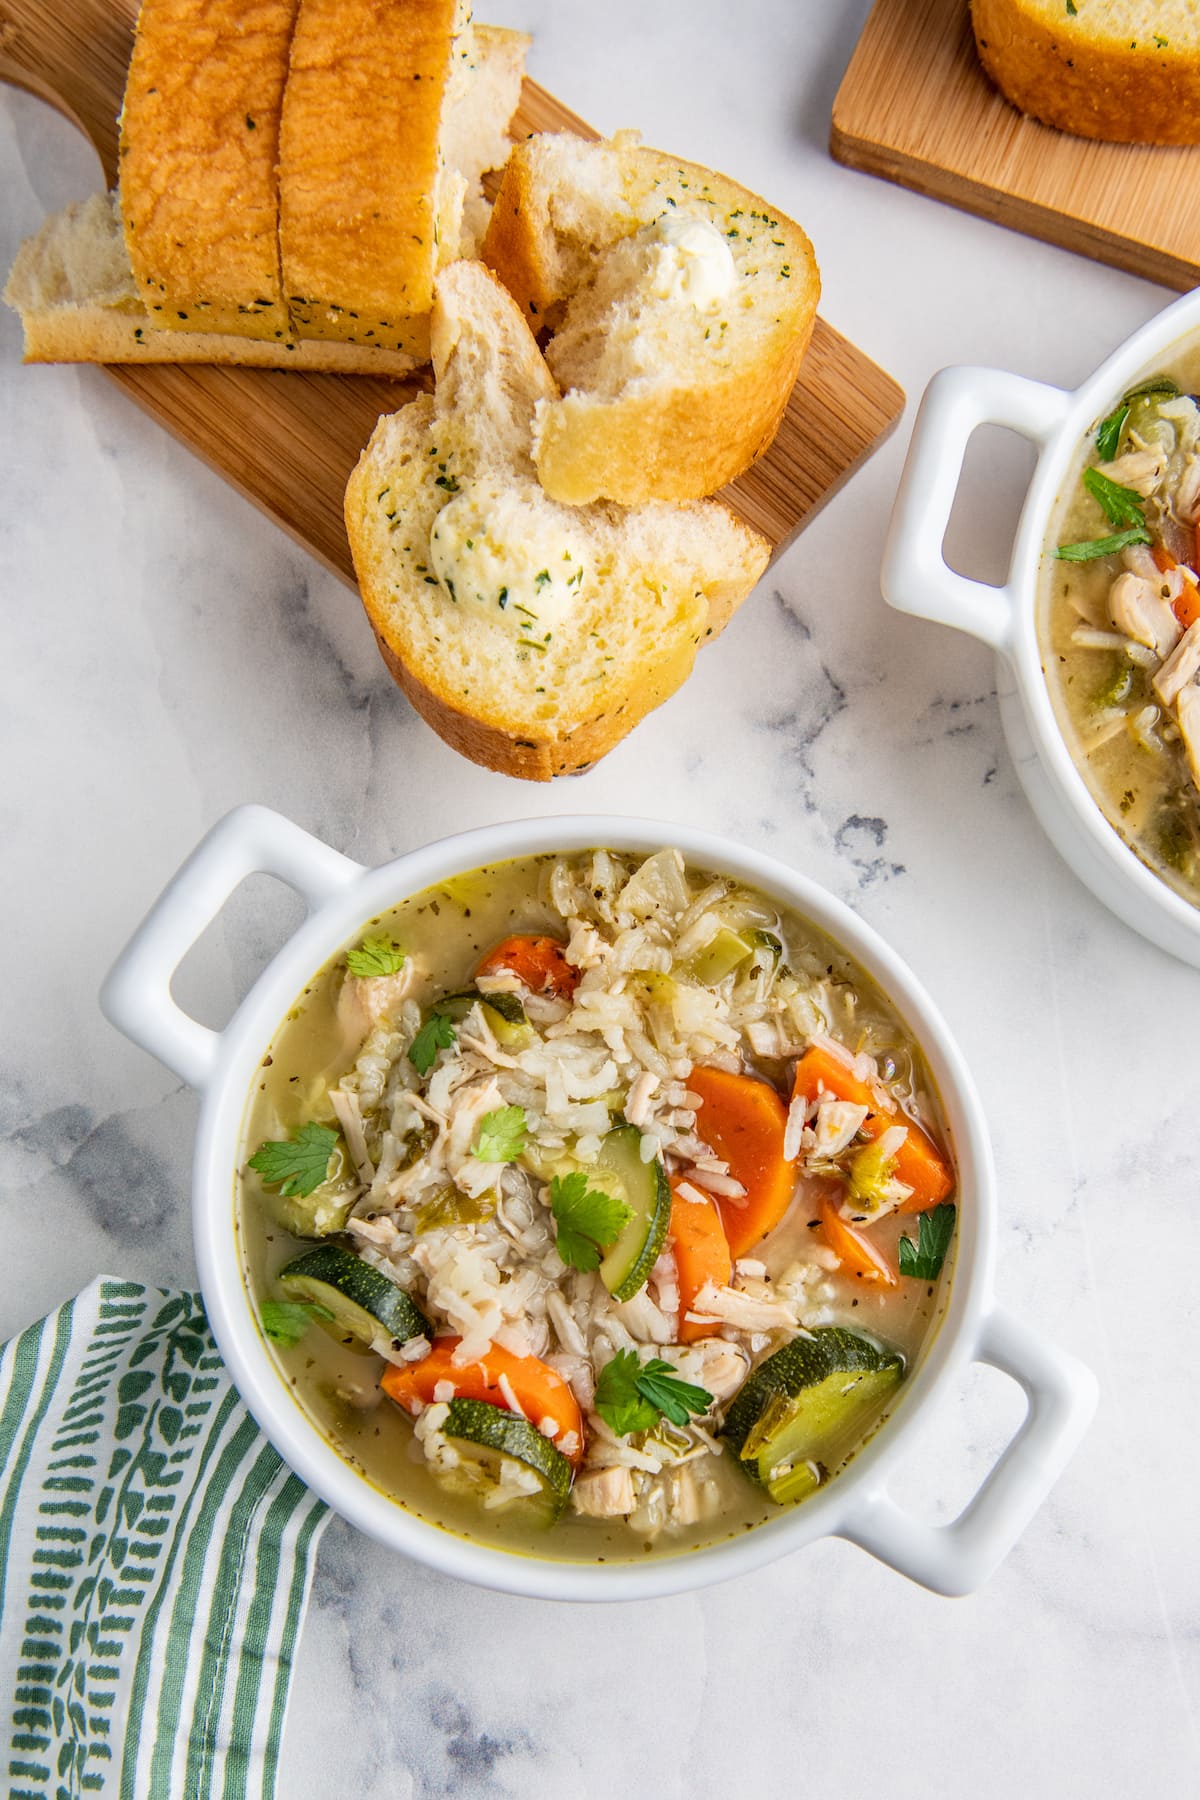 a soup bowl with chicken, rice, and vegetable soup alongside some pieces of bread